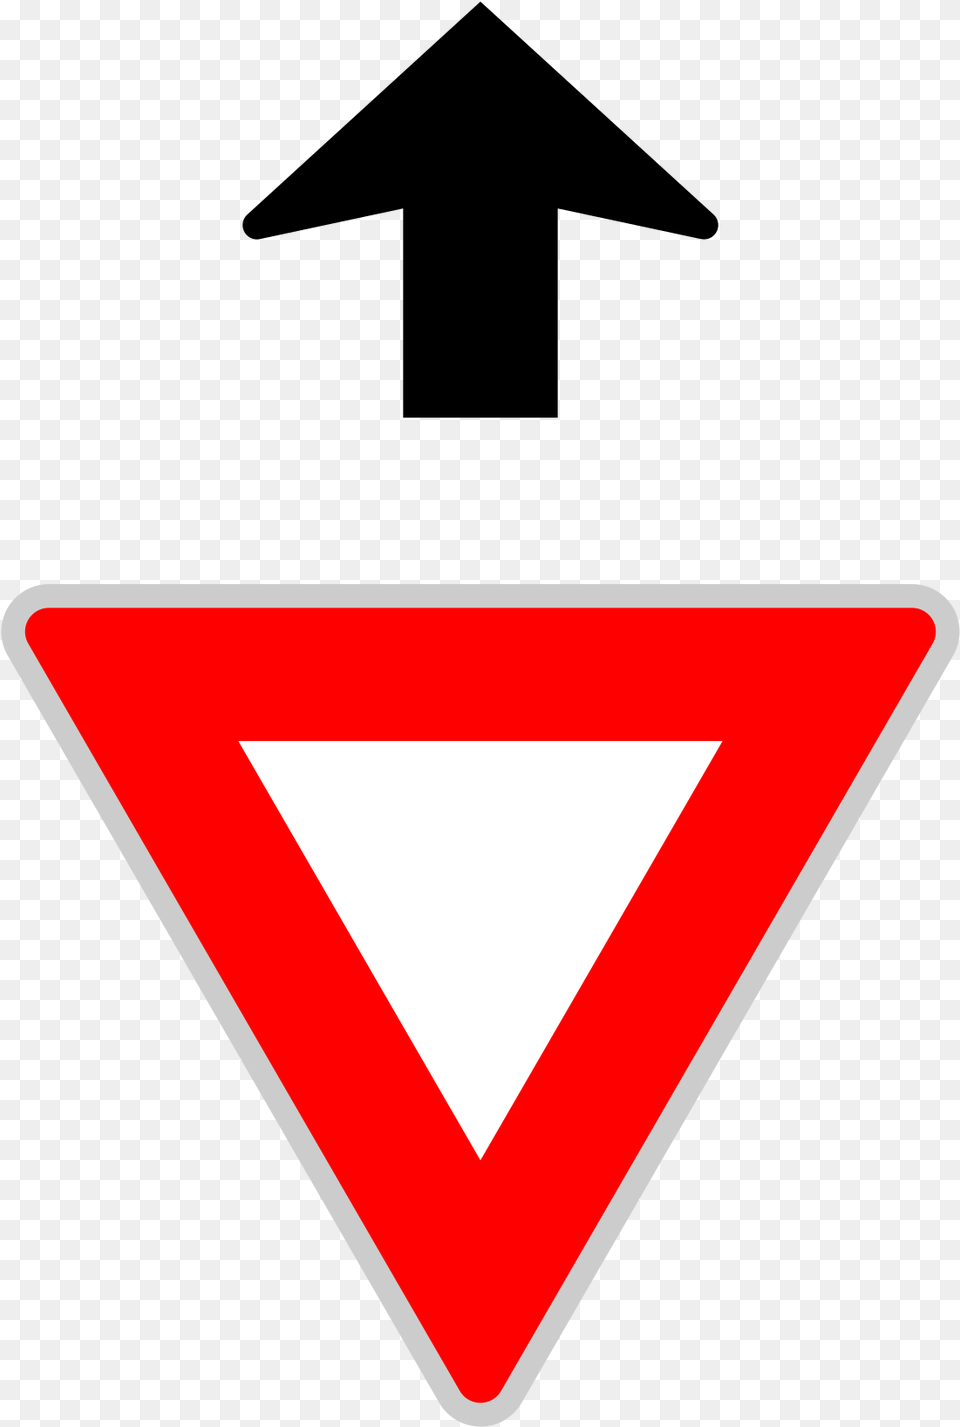 Sign With Triangle And Arrow, Symbol, Road Sign, Dynamite, Weapon Free Png Download